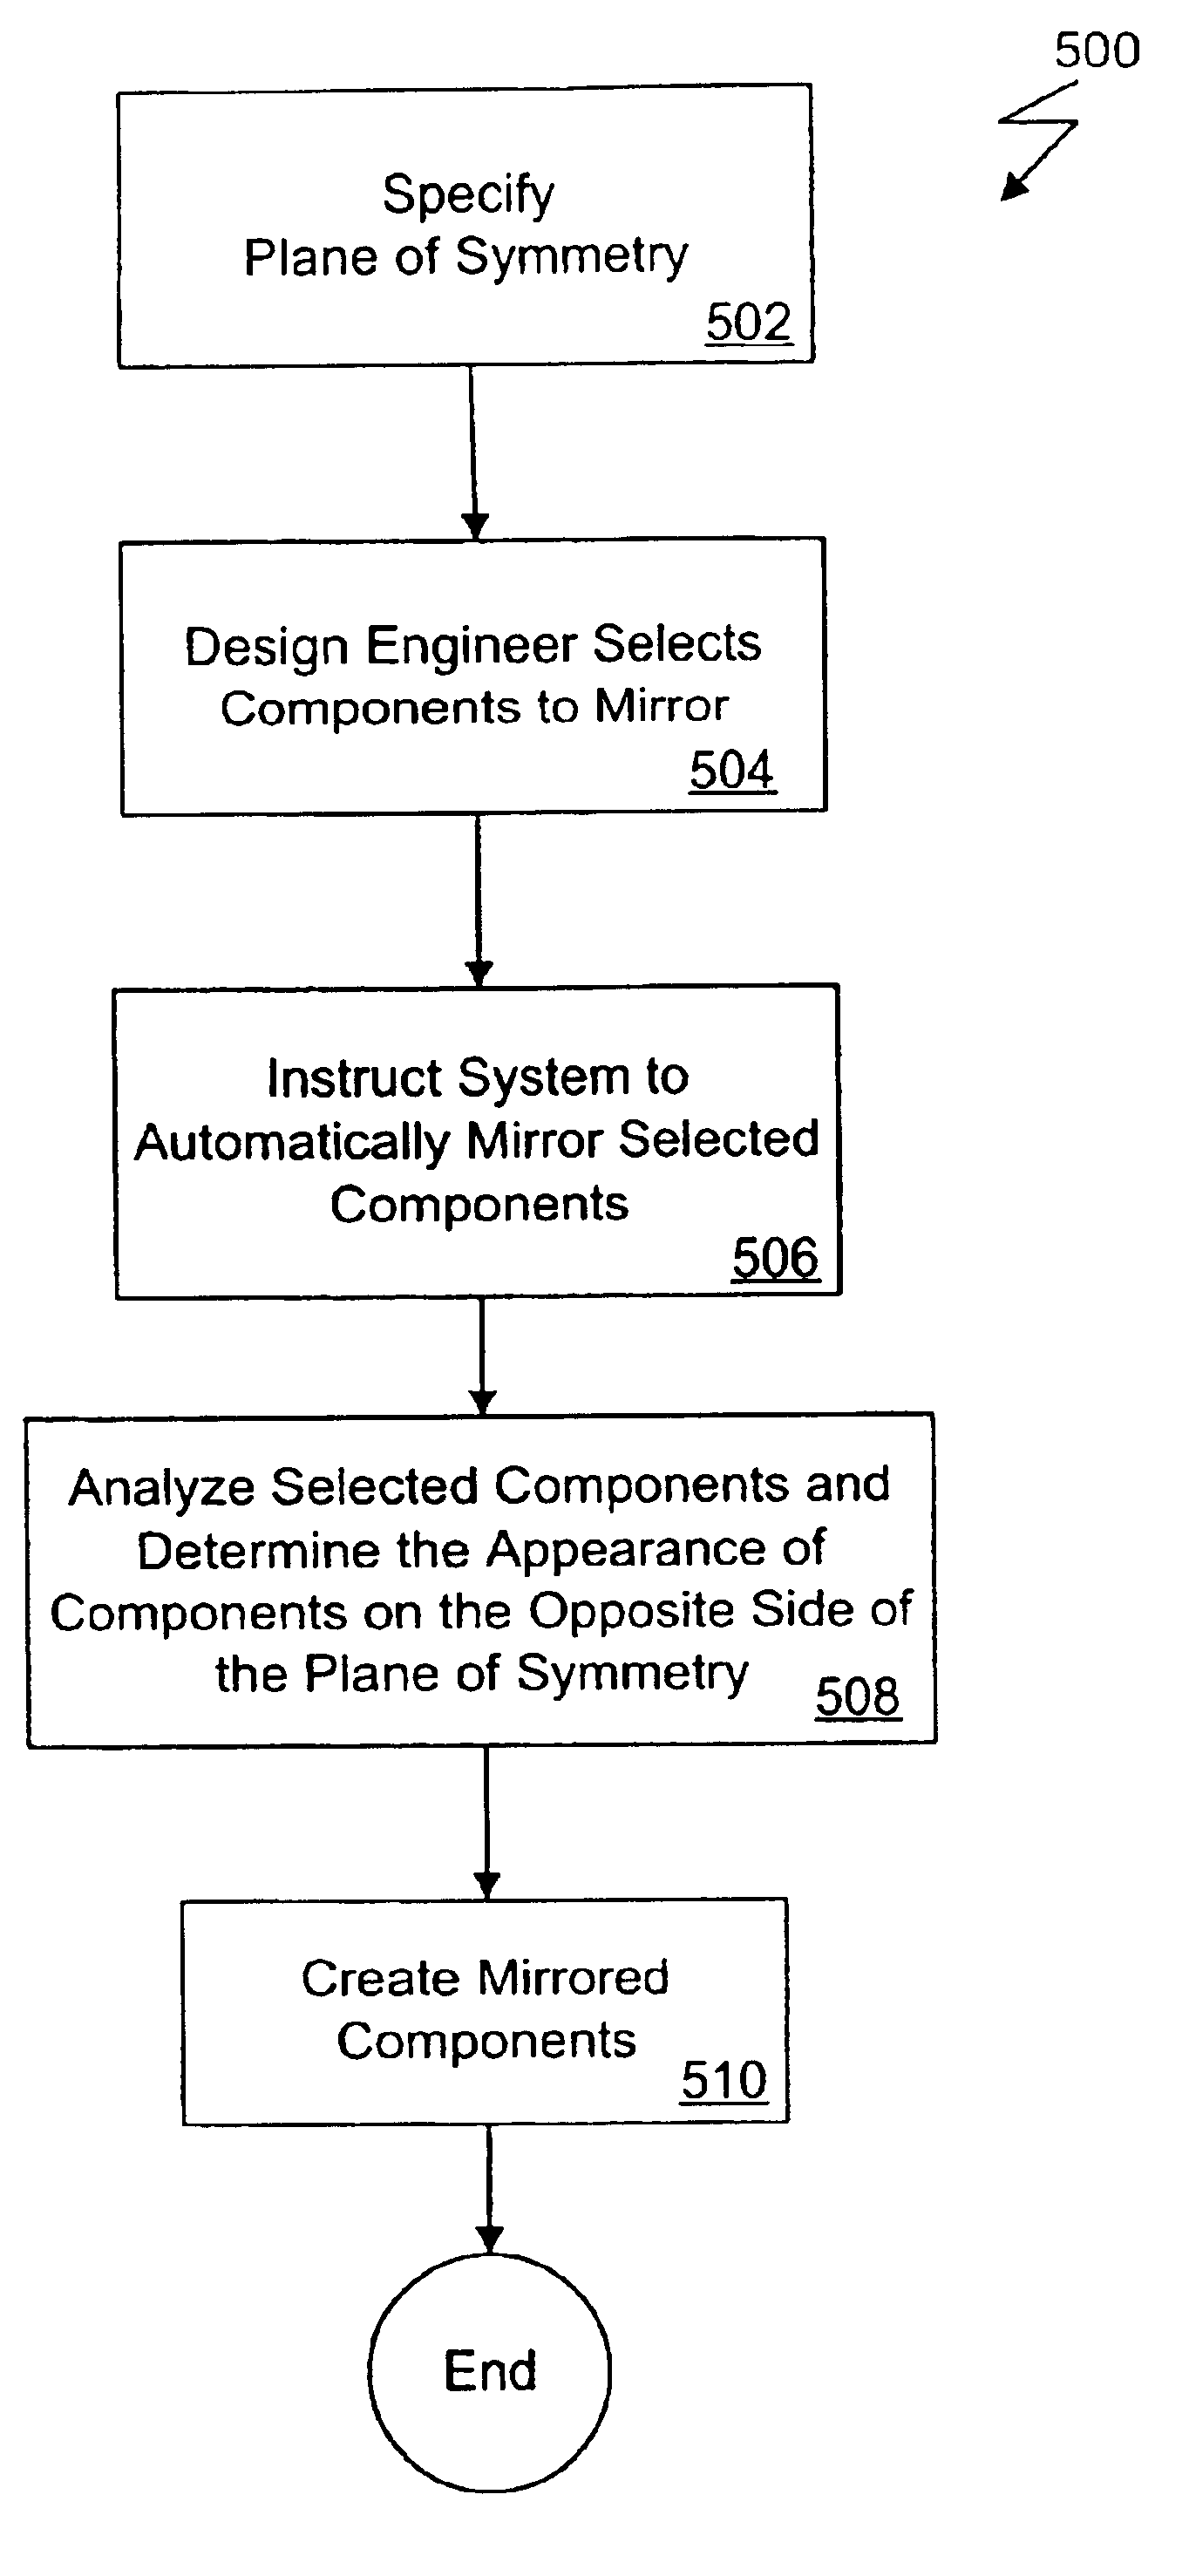 Automated mirroring of components